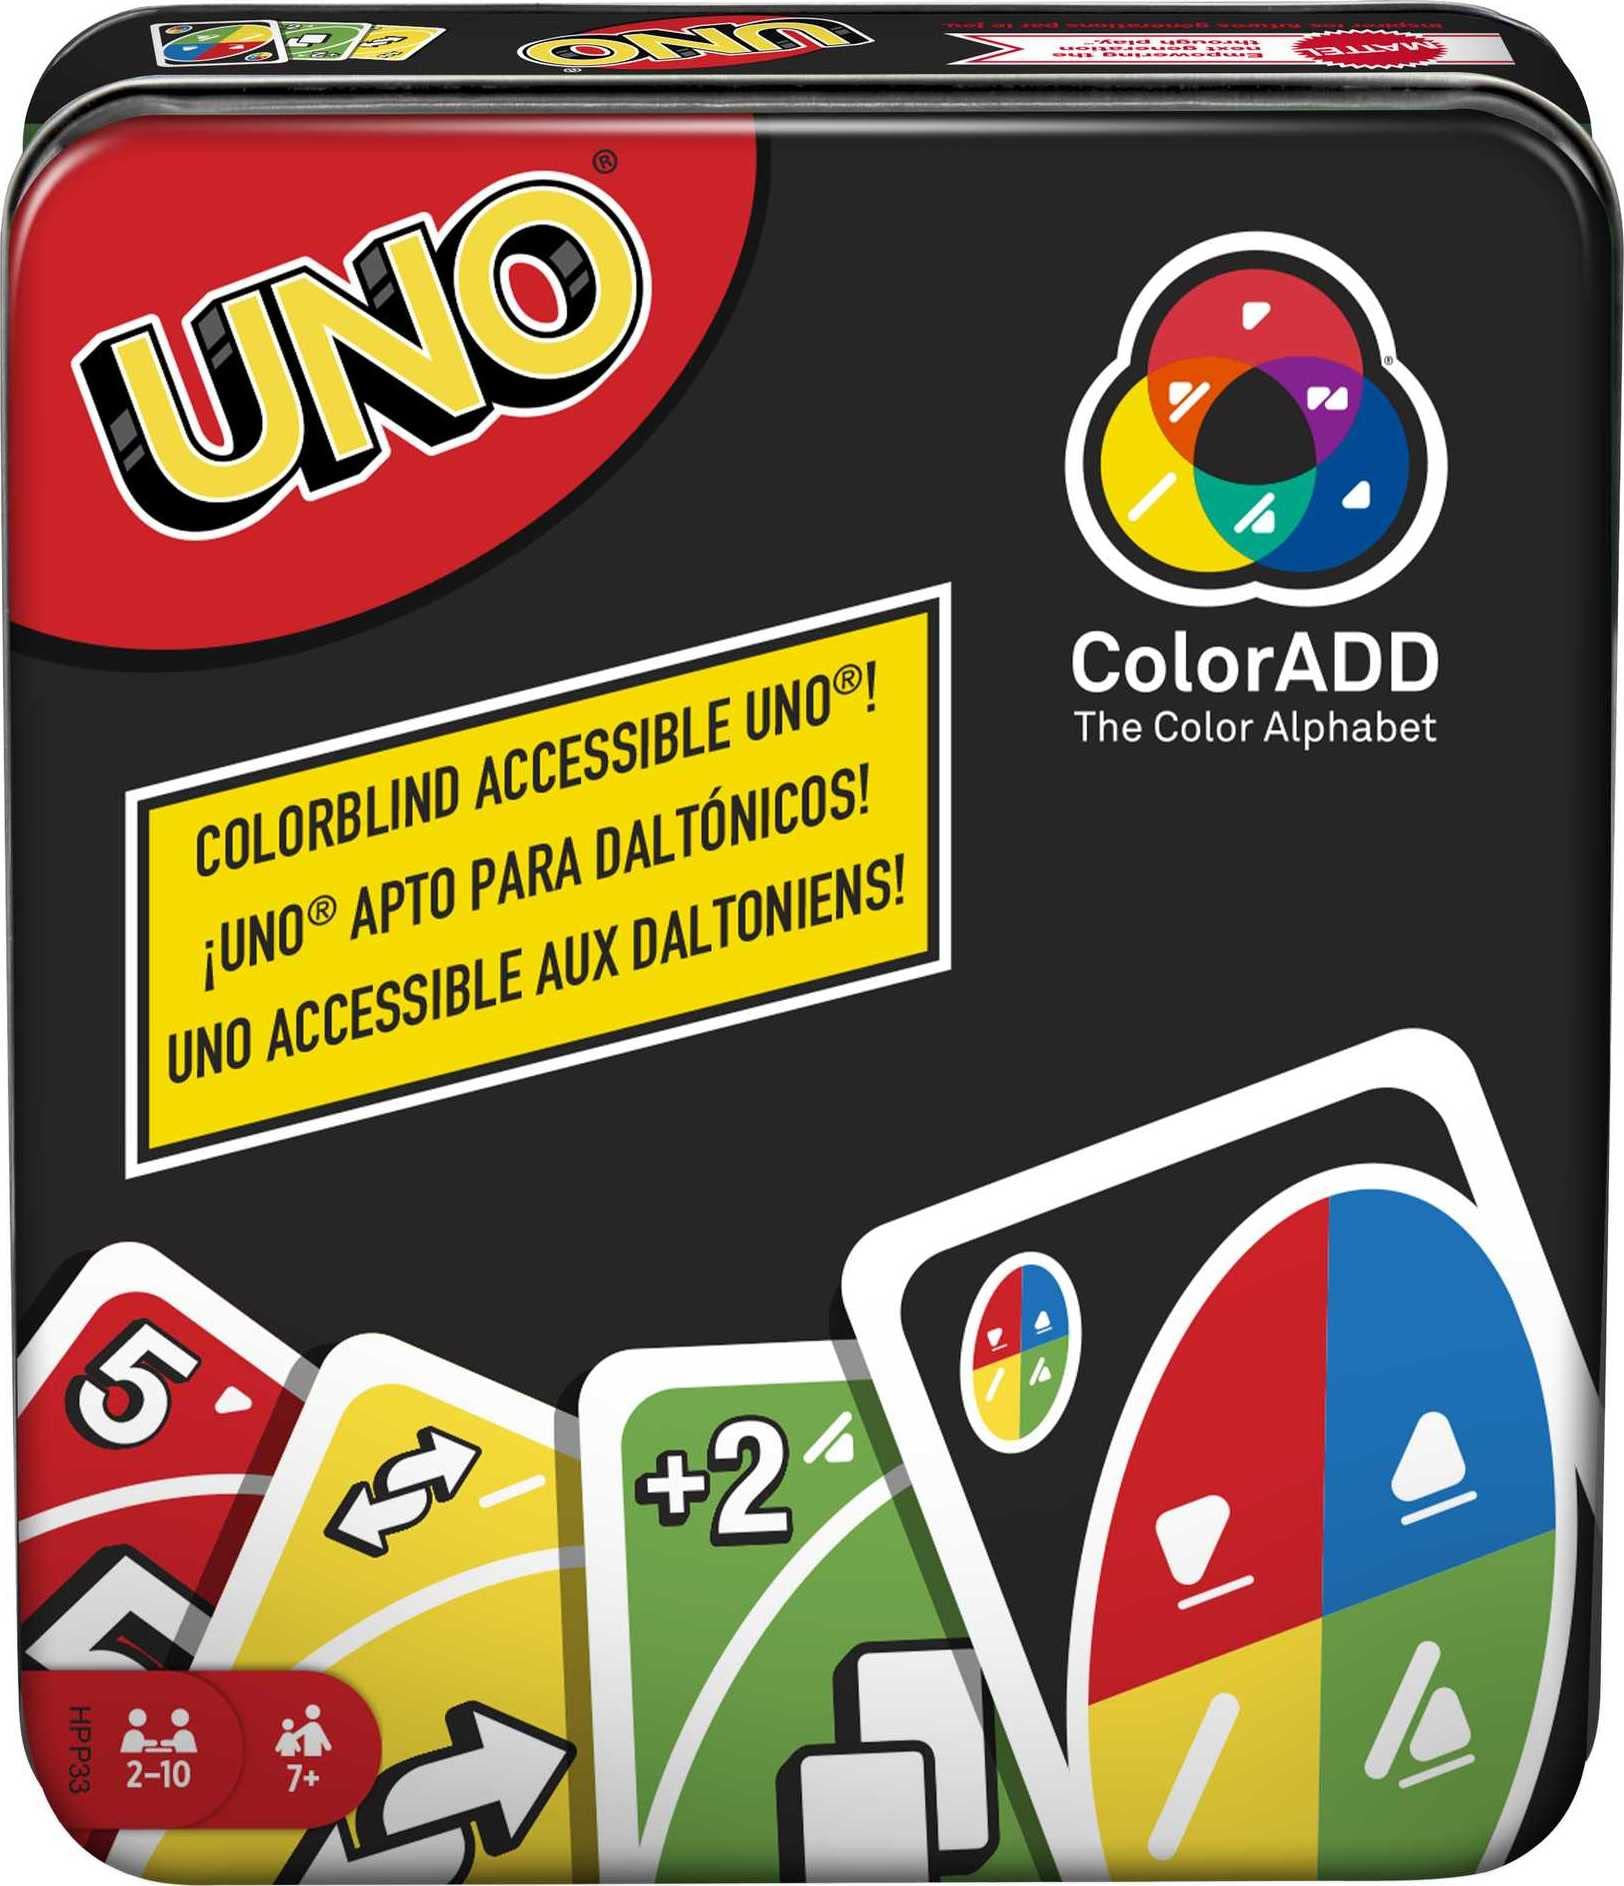 UNO Card Game Coloradd for Colorblind & Color Sighted Players, Travel Game in Storage Tin for 2-10 Players